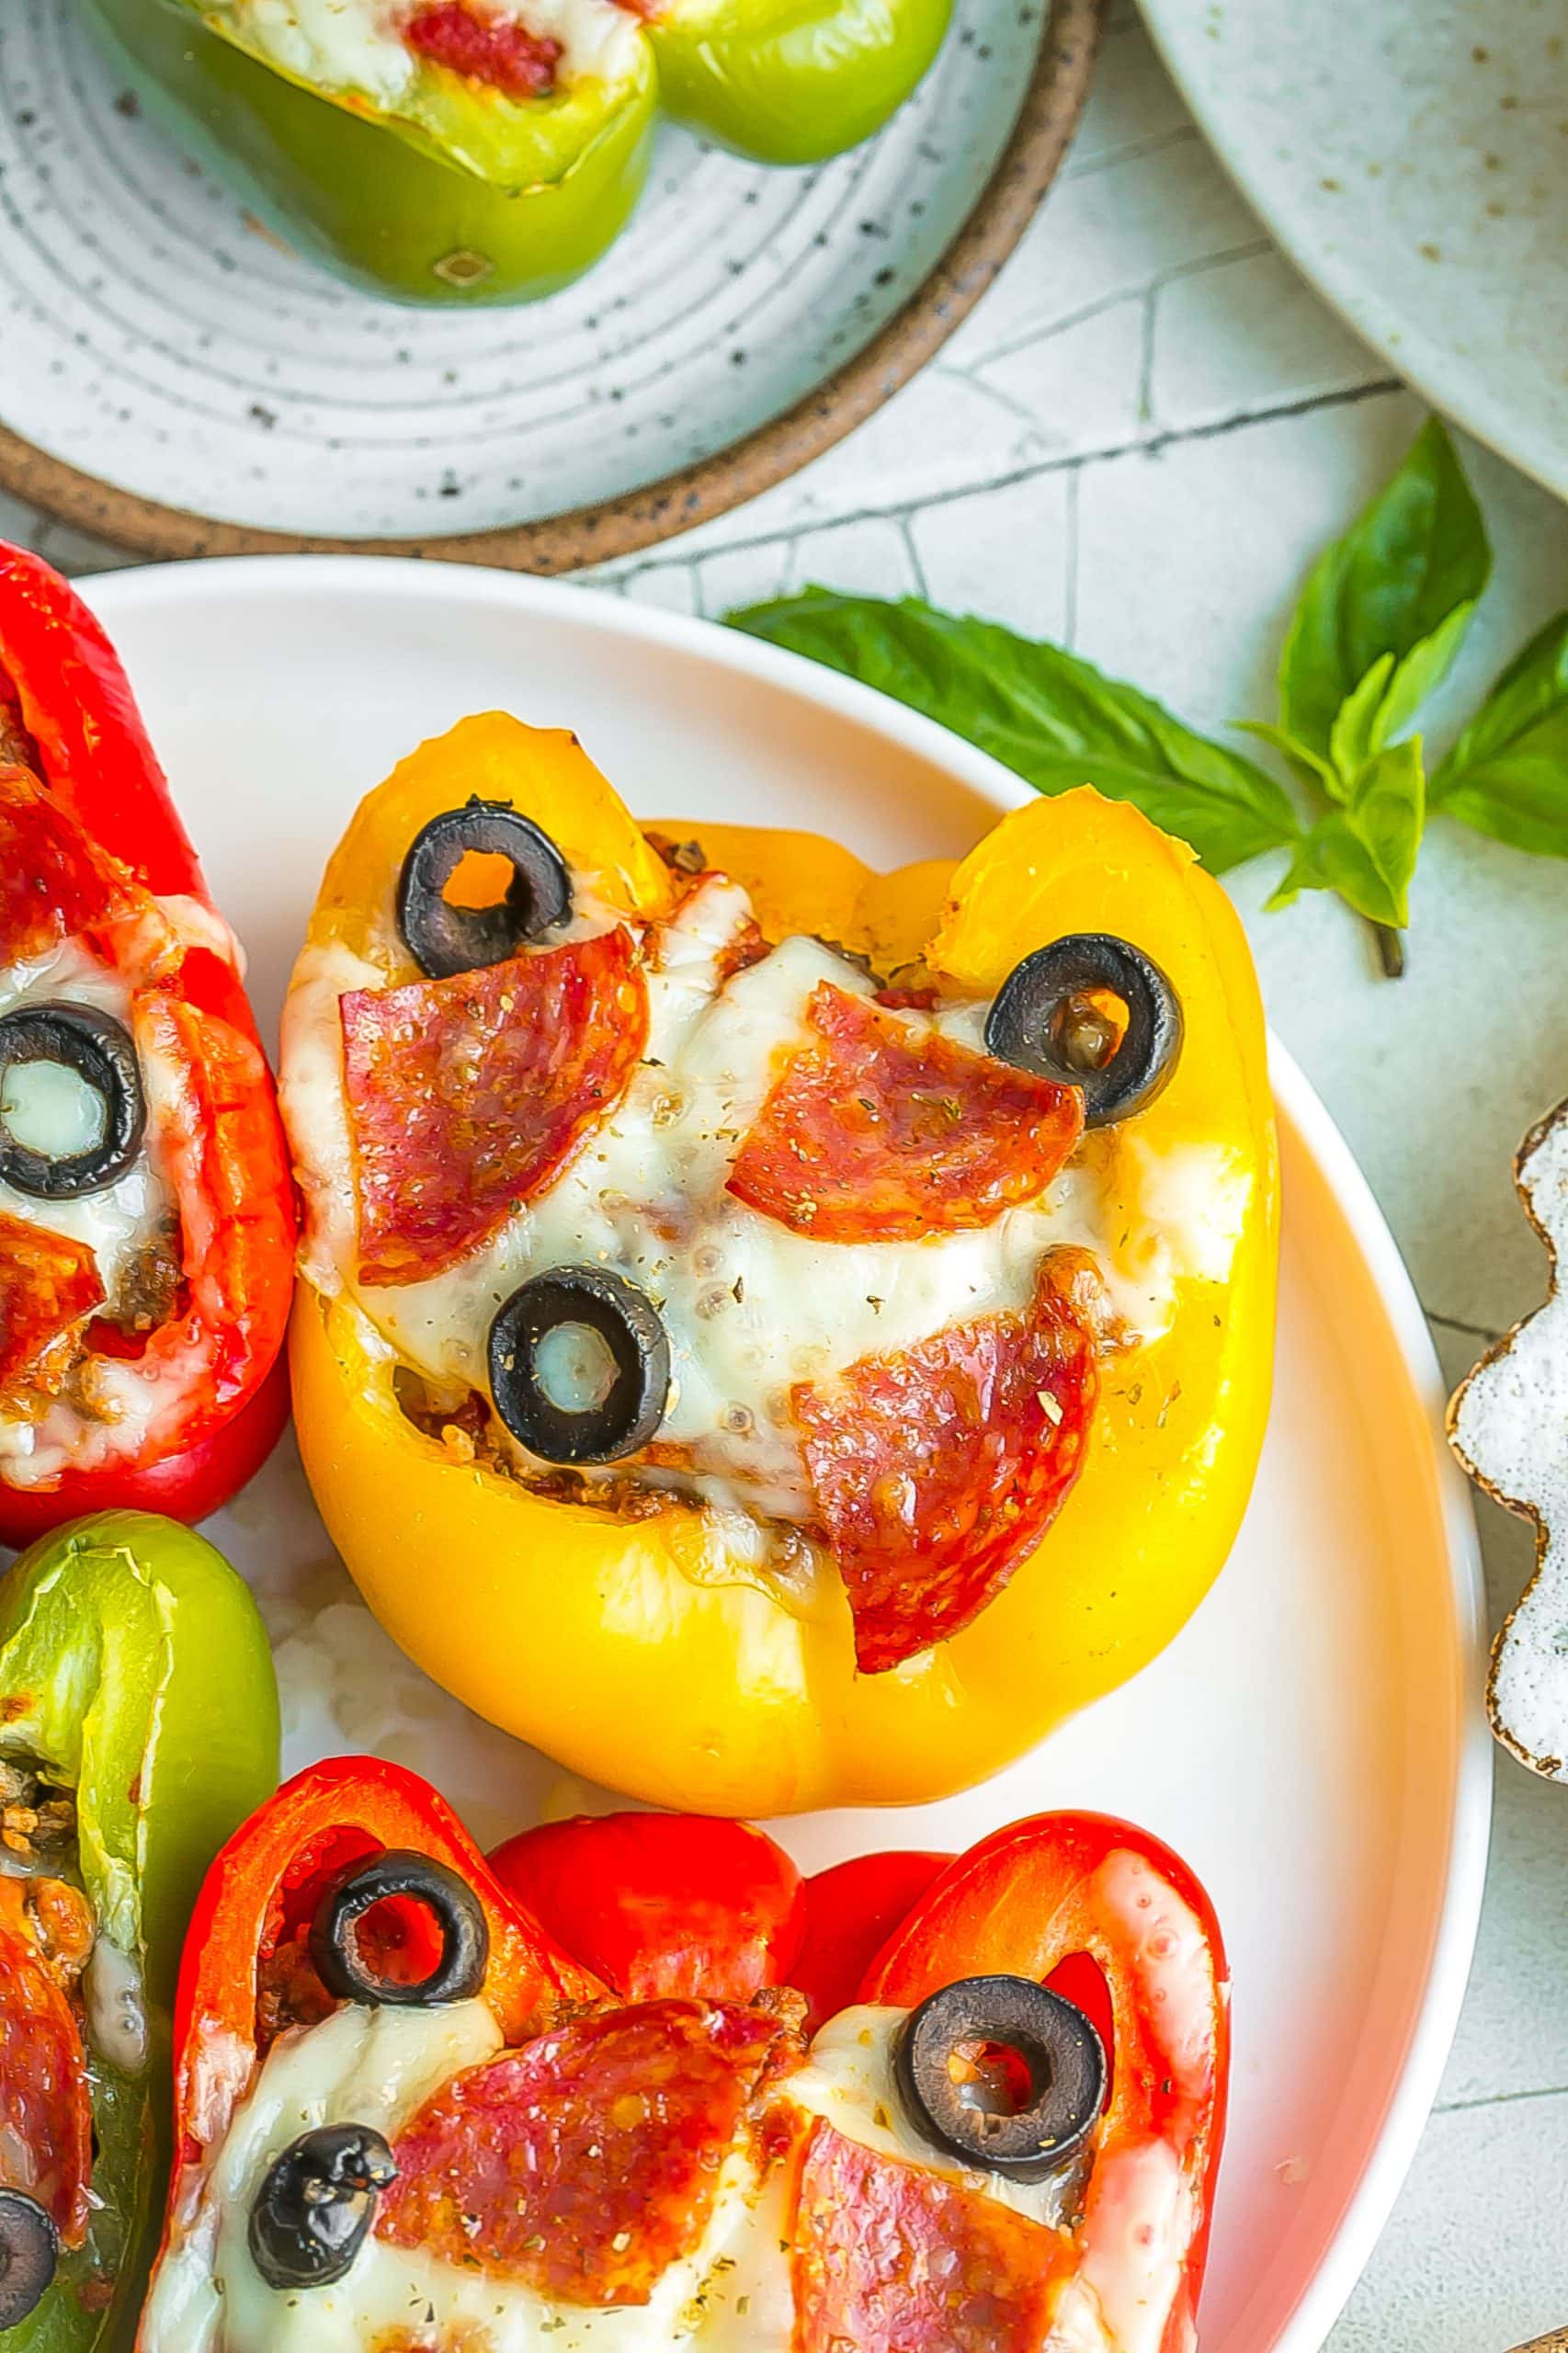 5 health benefits of red peppers. Plus, our world's healthiest pizza recipe  - Chatelaine - Chatelaine